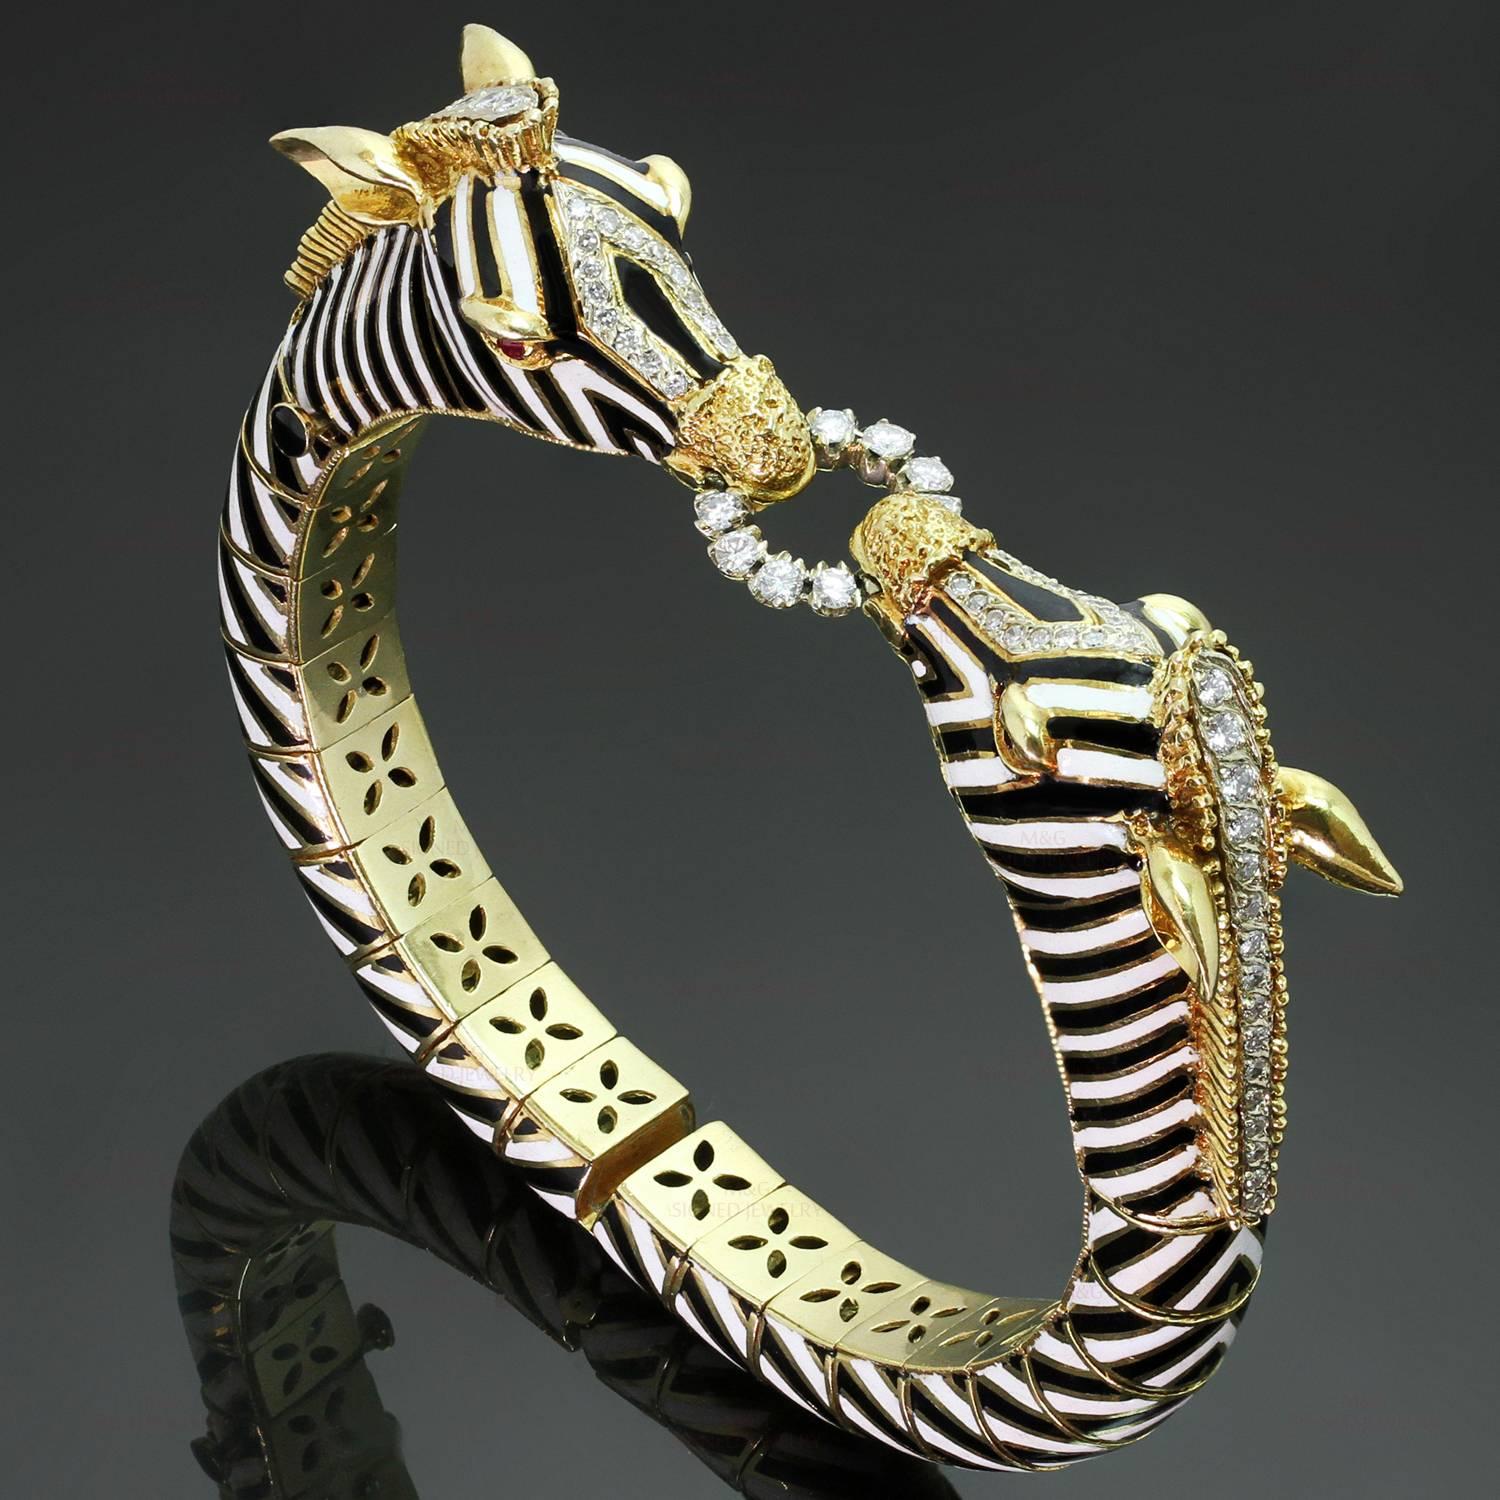 This gorgeous Pierino Frascarolo bangle bracelet features a double zebra head design crafted in 18 yellow gold with black and white enamel stripes, 70 brilliant-cut round diamonds of an estimated 1.35 carats, and ruby eyes. With a 7.0-7.5 inch